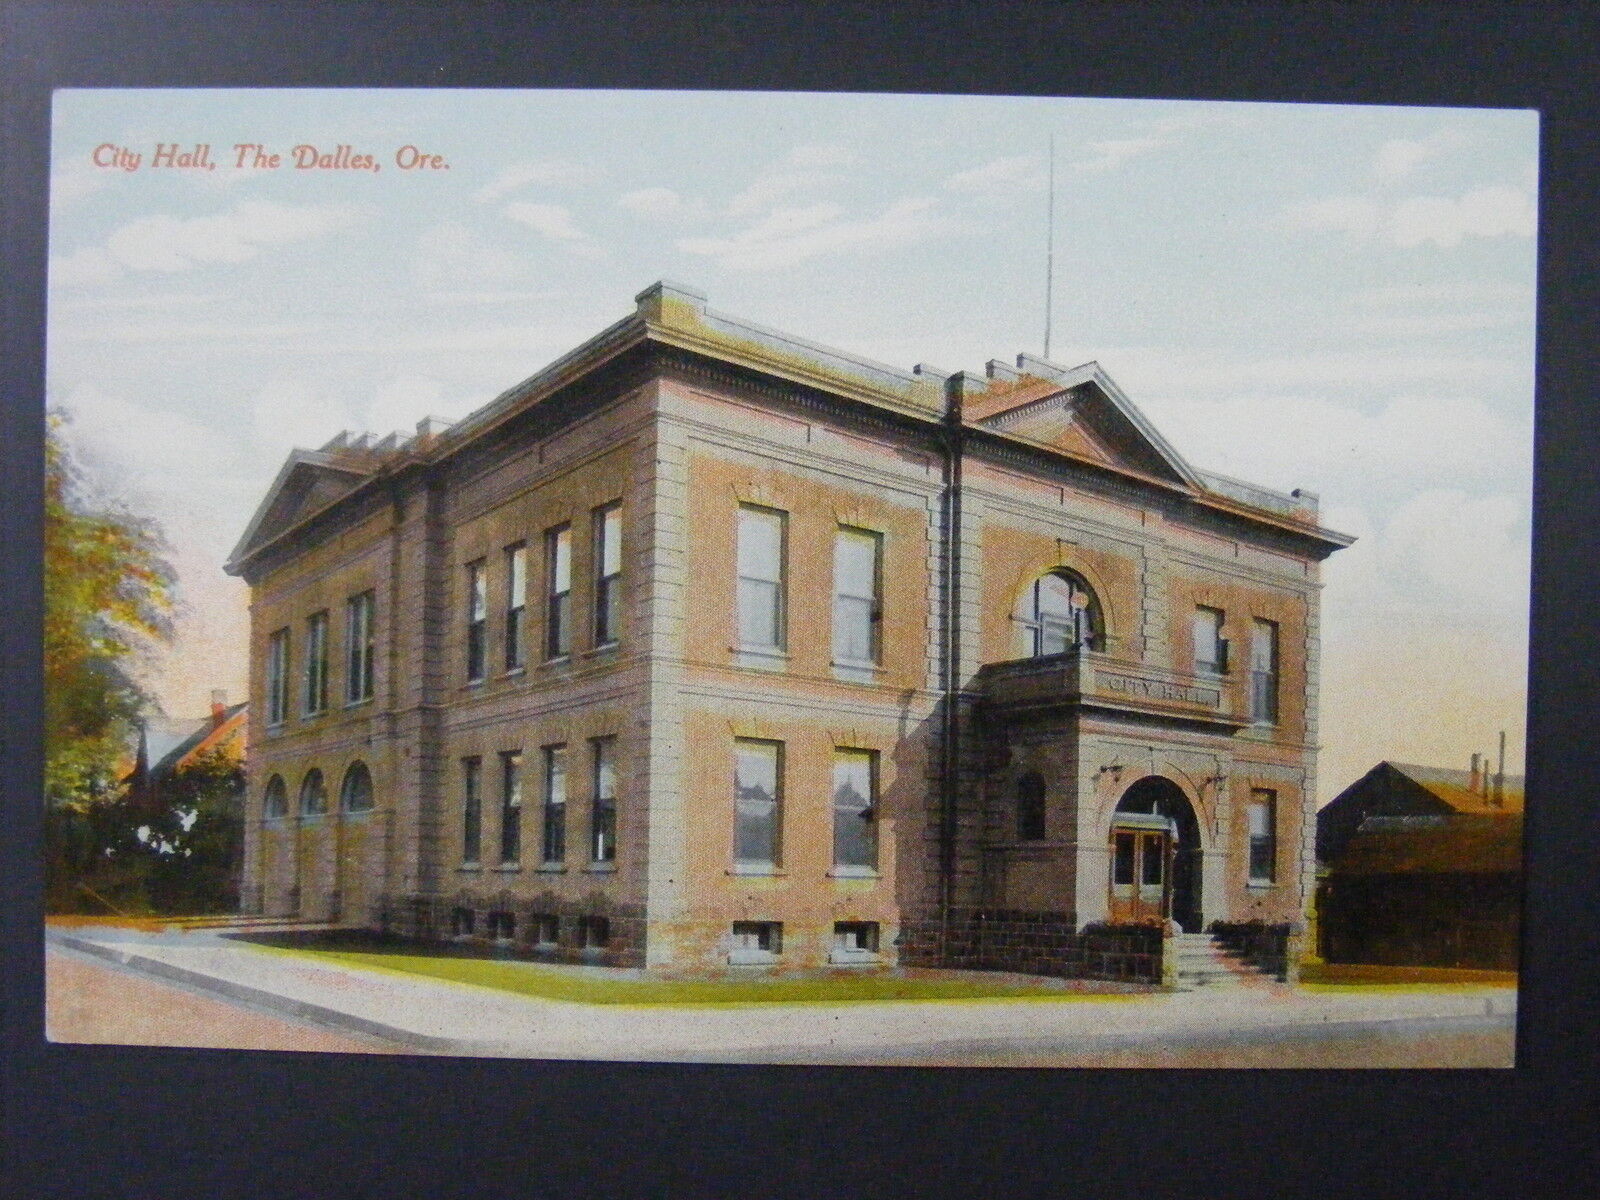 The Dalles Oregon OR City Hall View Divided Back Postcard Unused c1910 Antique